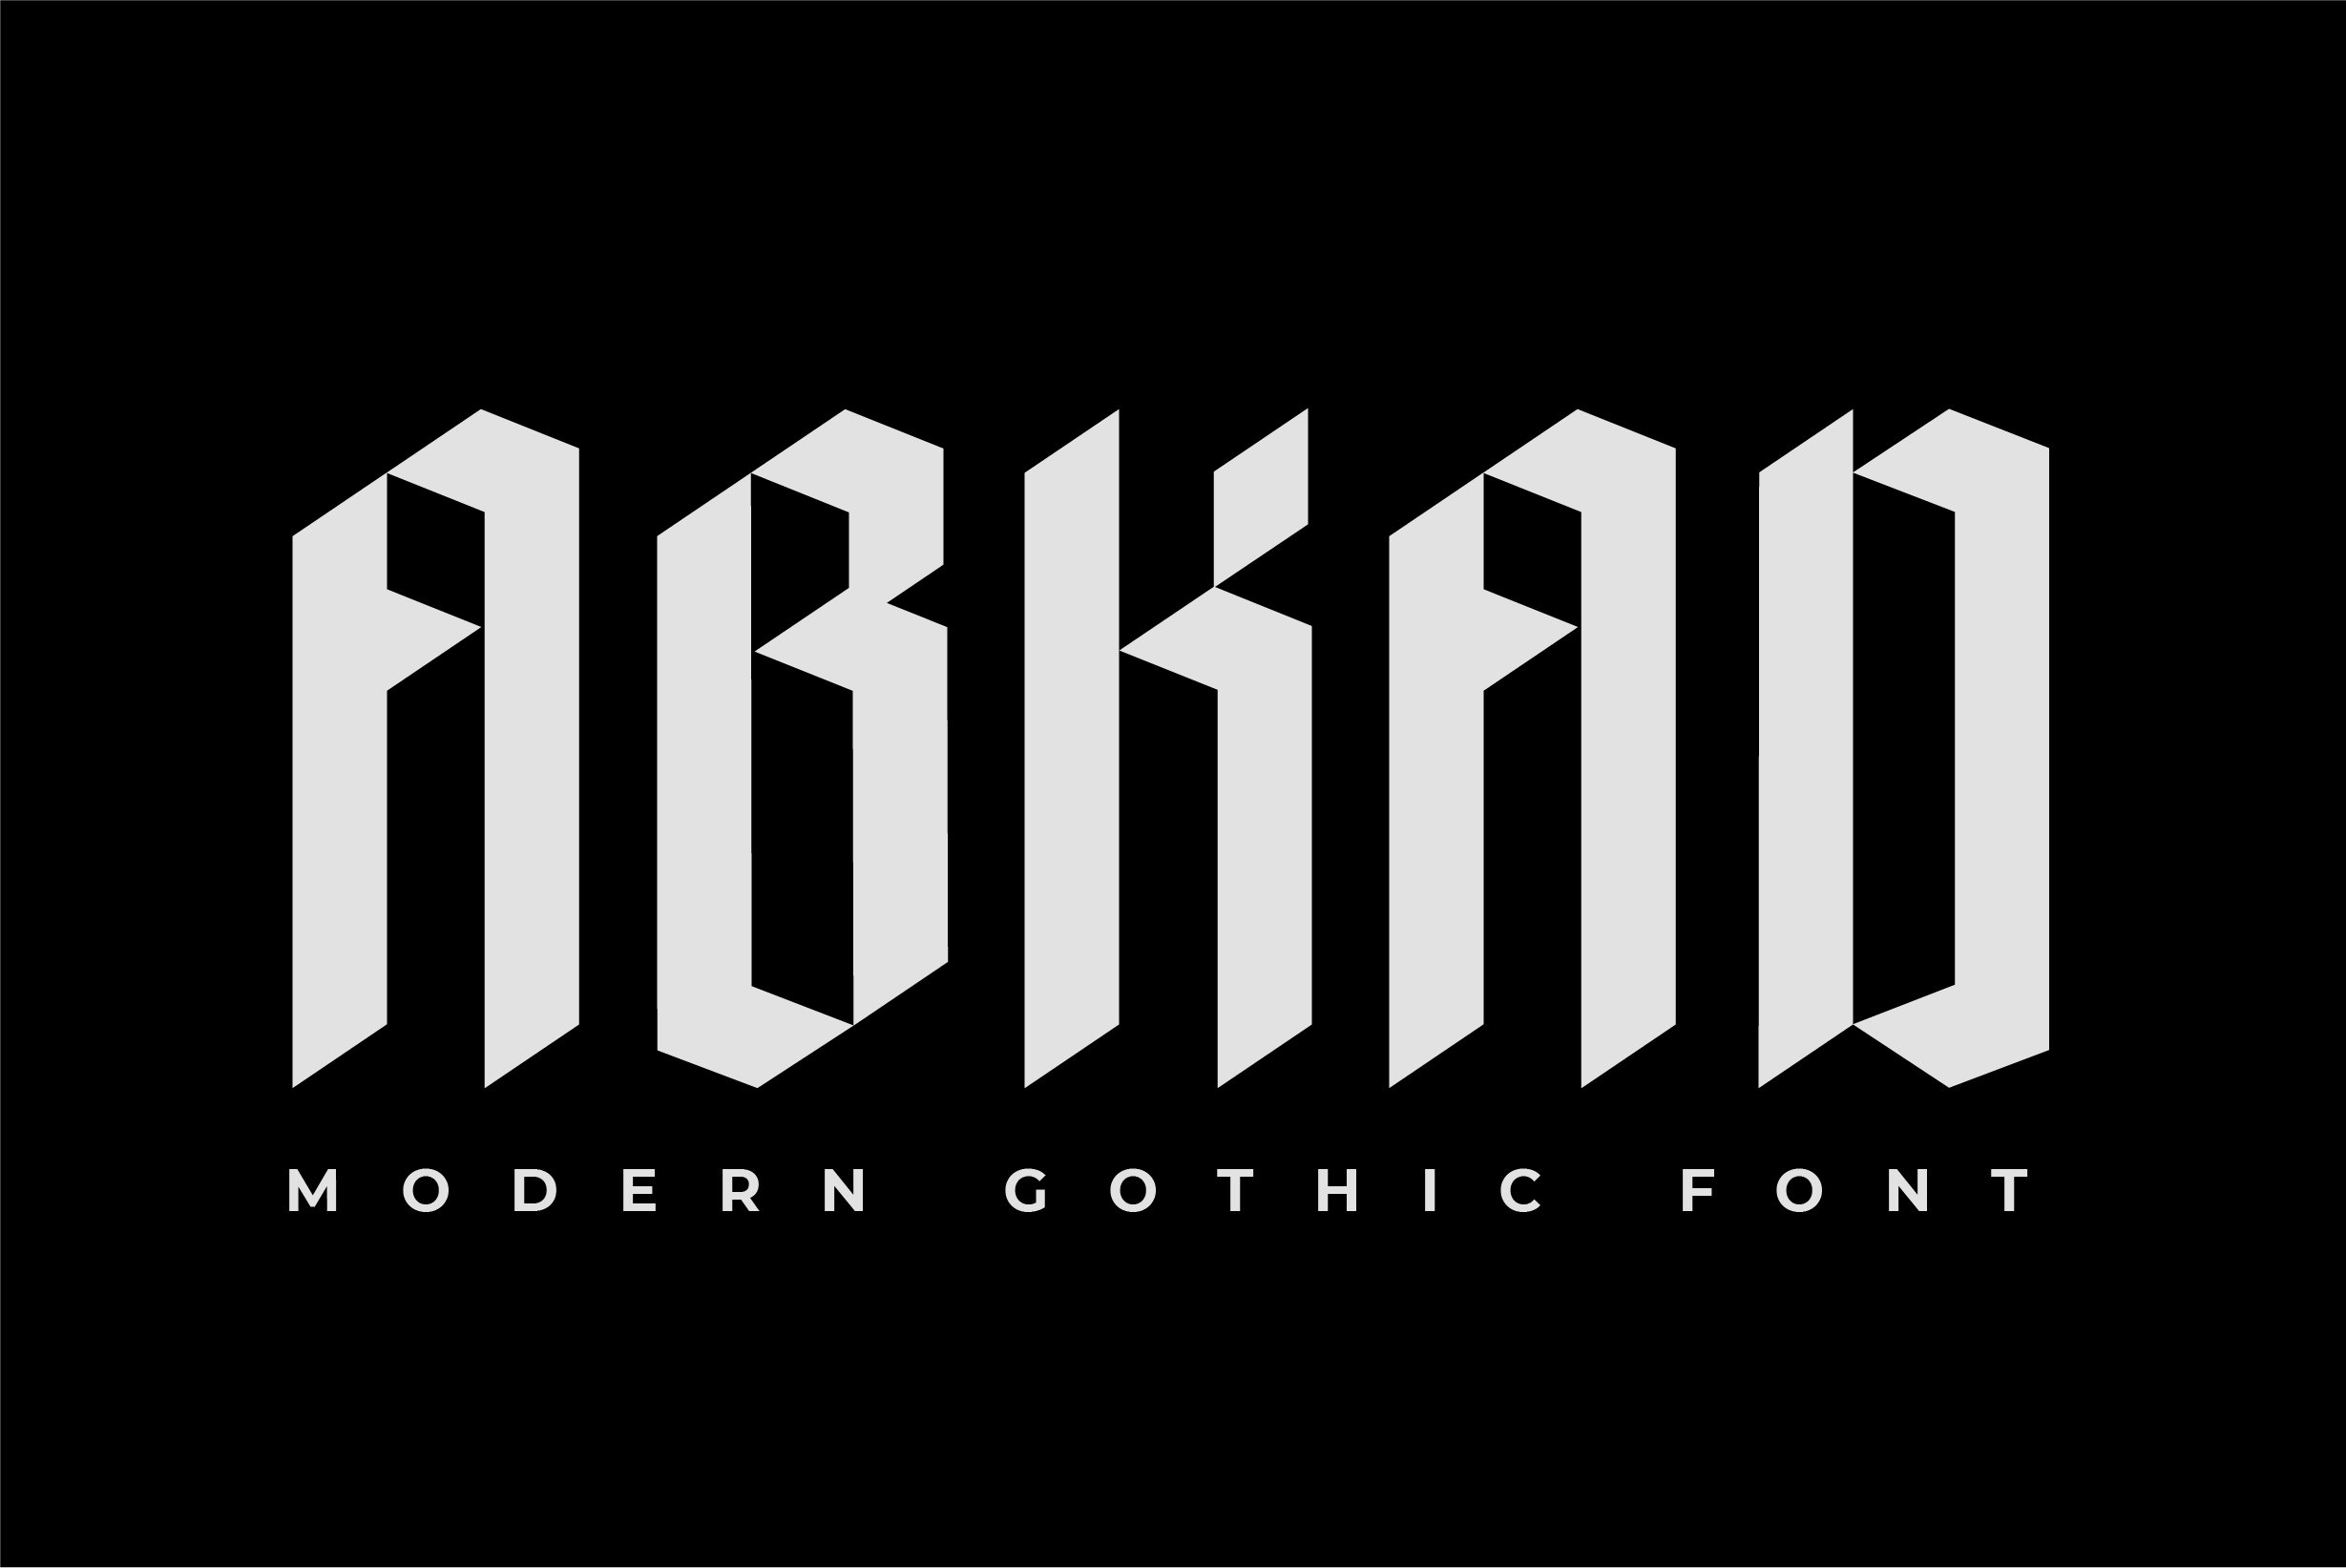 Abkad - Modern Gothic Font cover image.